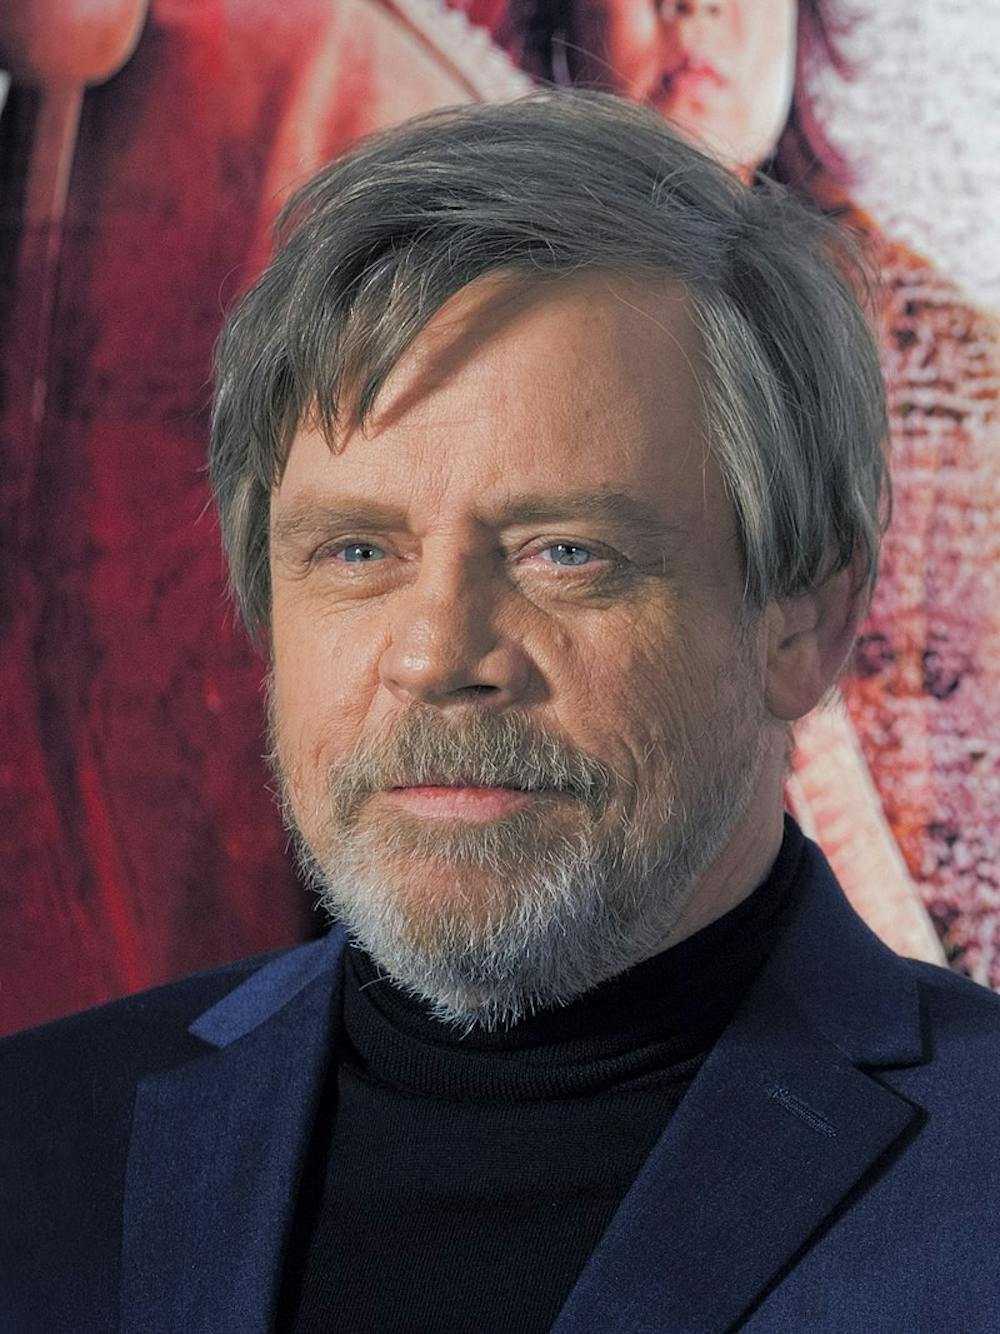 Mark Hamill reprises his role as Luke Skywalker in the final installment of the "Star Wars" series, "The Rise of Skywalker."